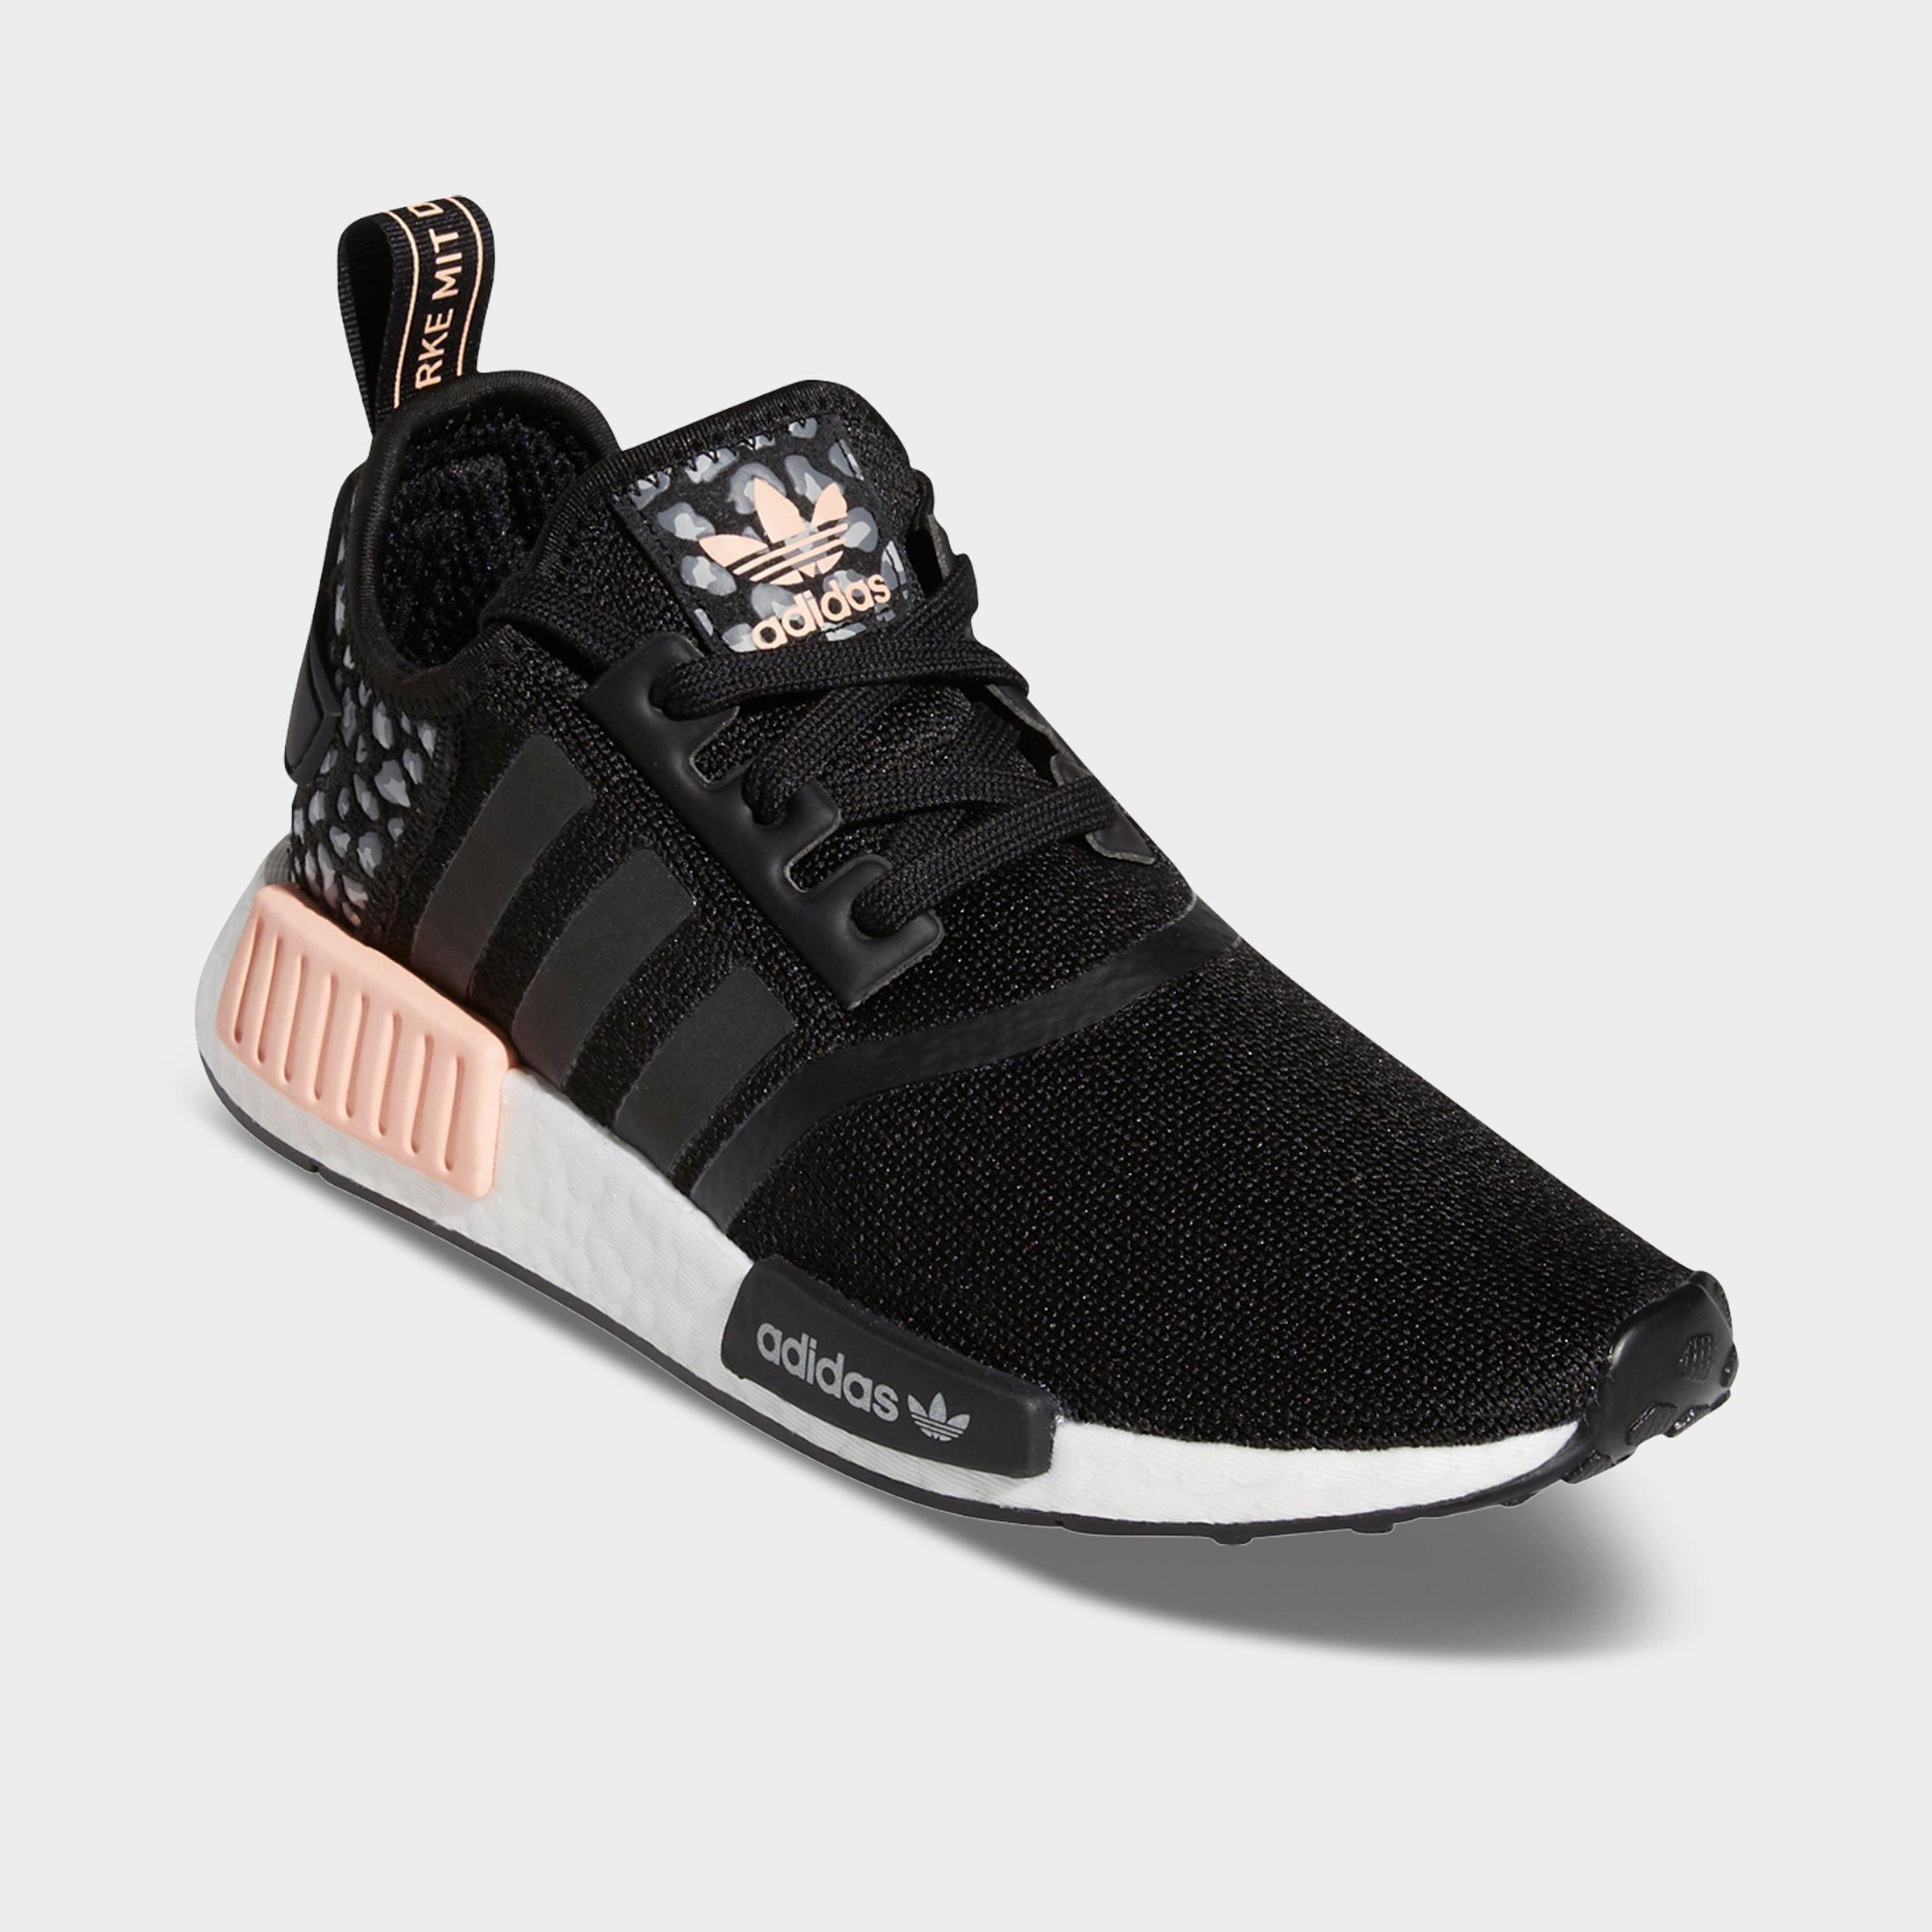 women's adidas nmd runner casual shoes